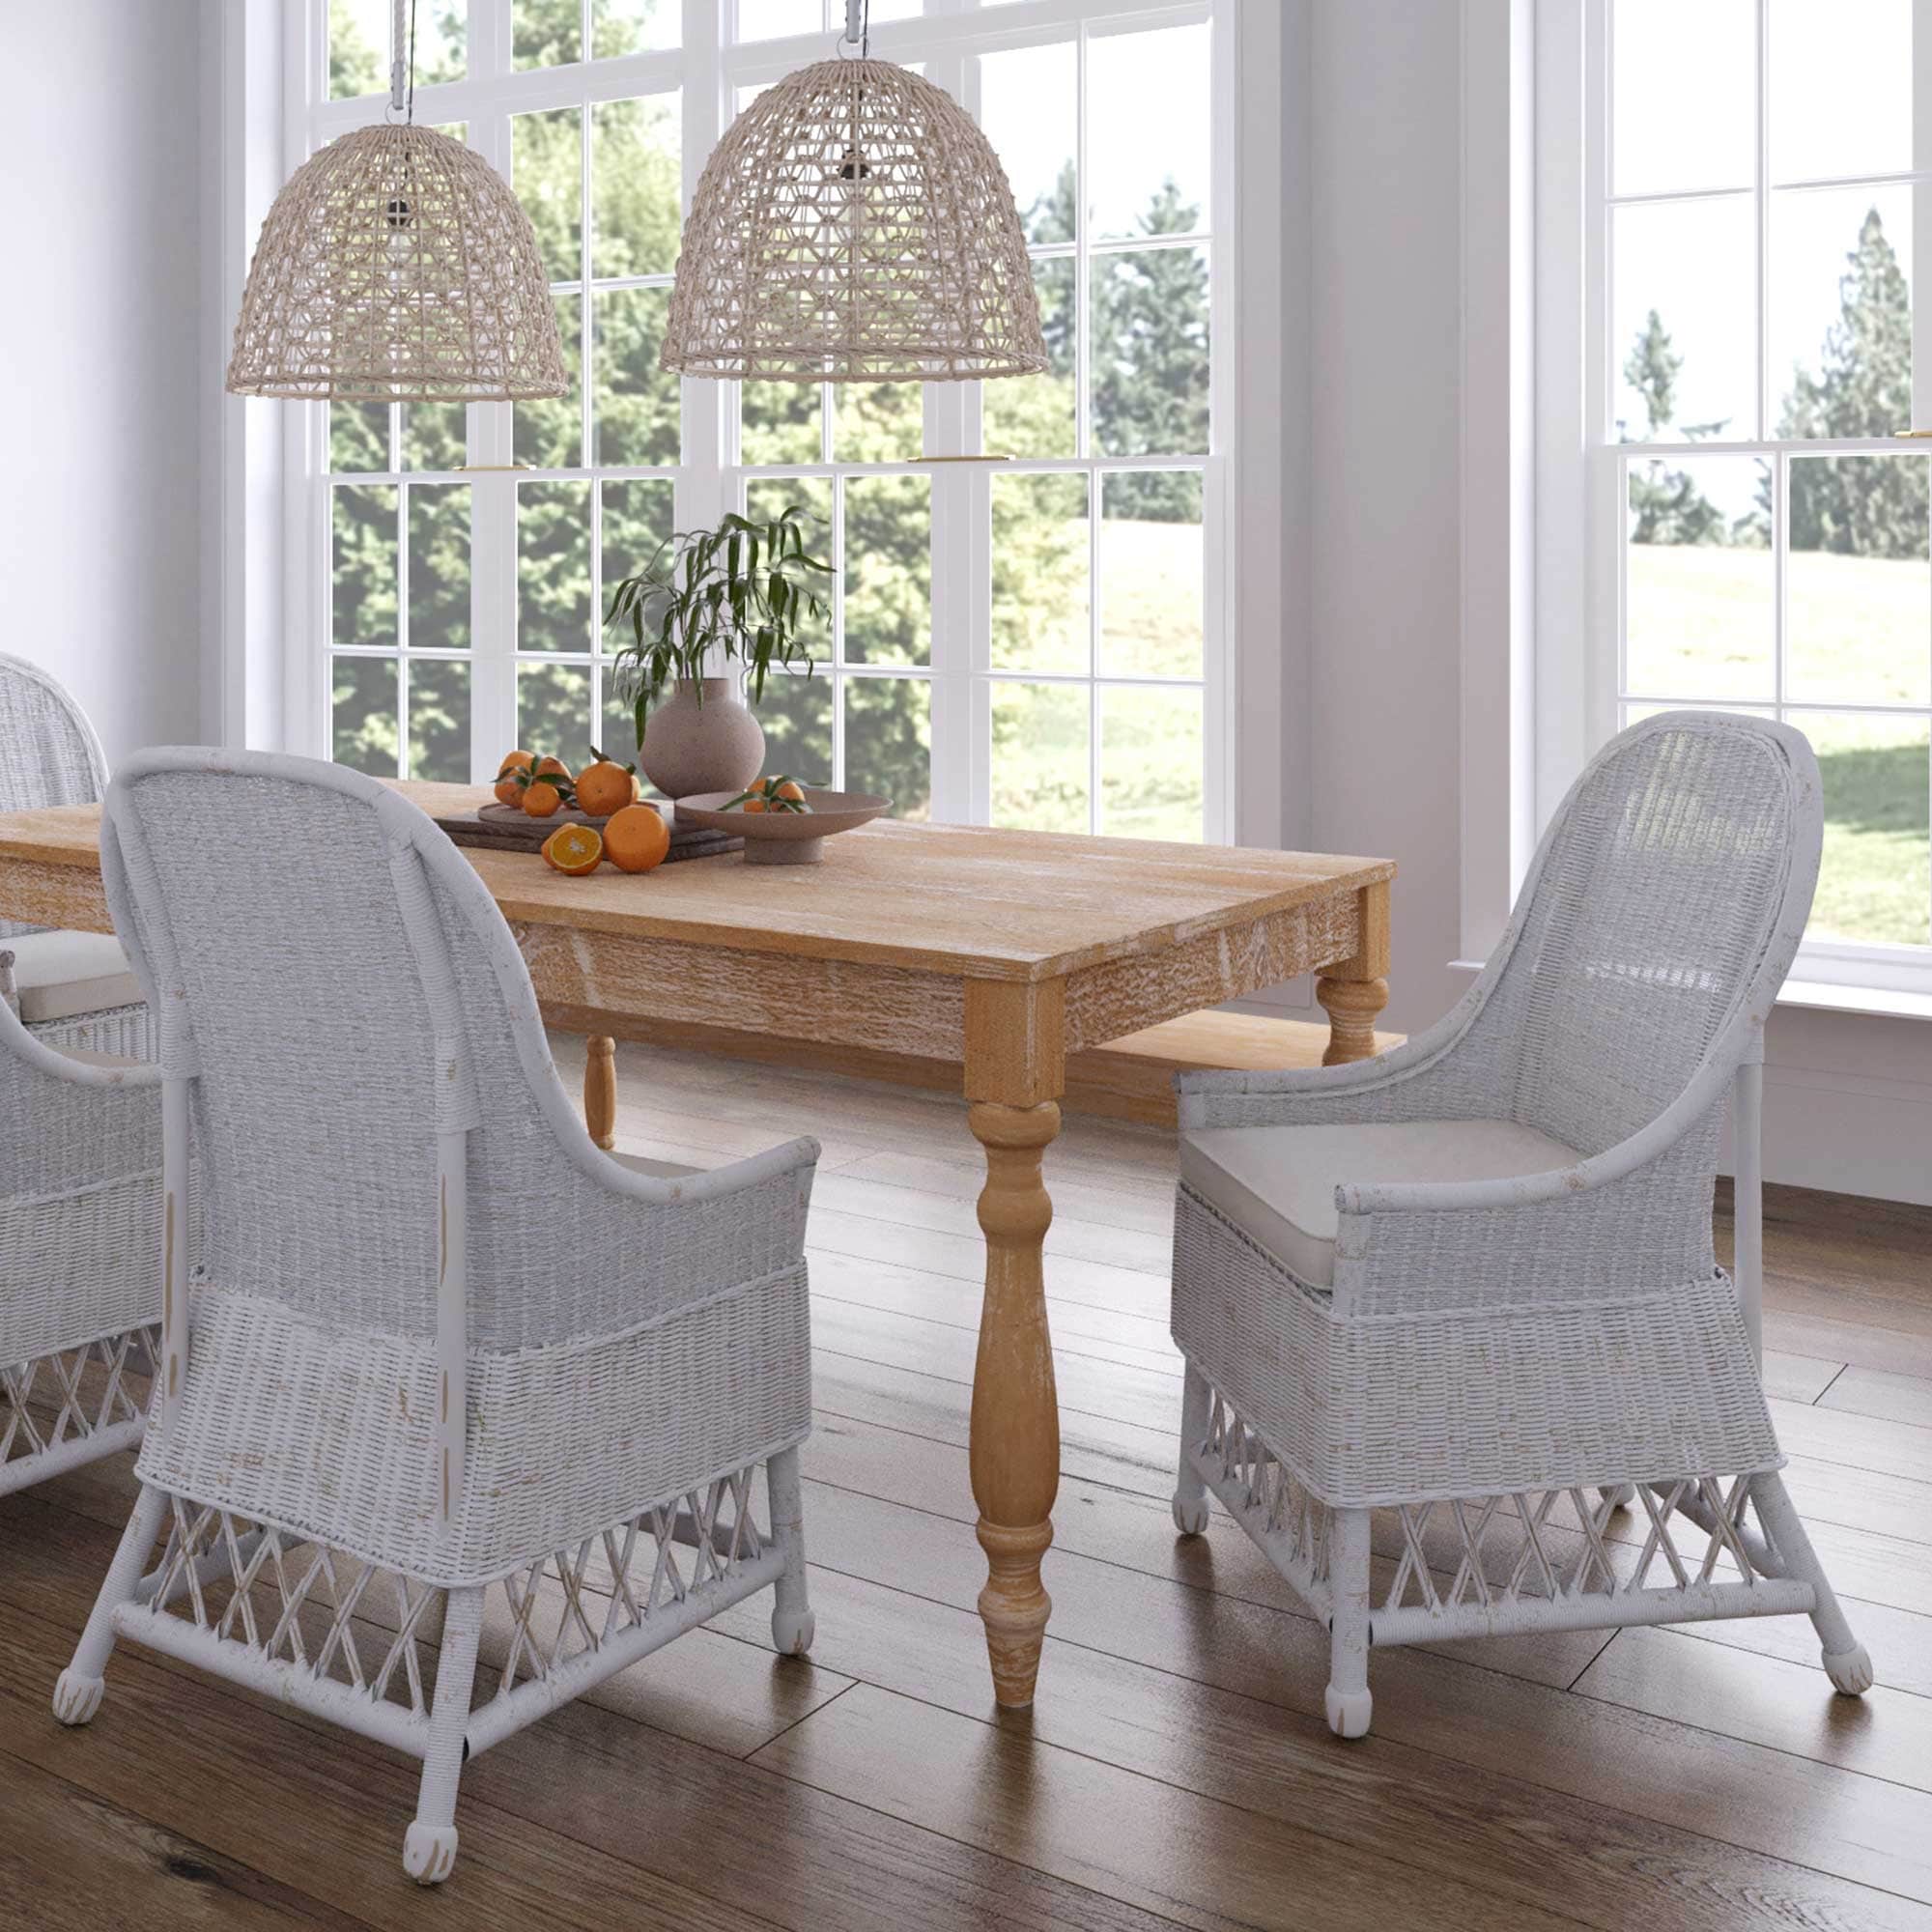 East at Main Curvilinear Rattan Cushioned Dining Chair